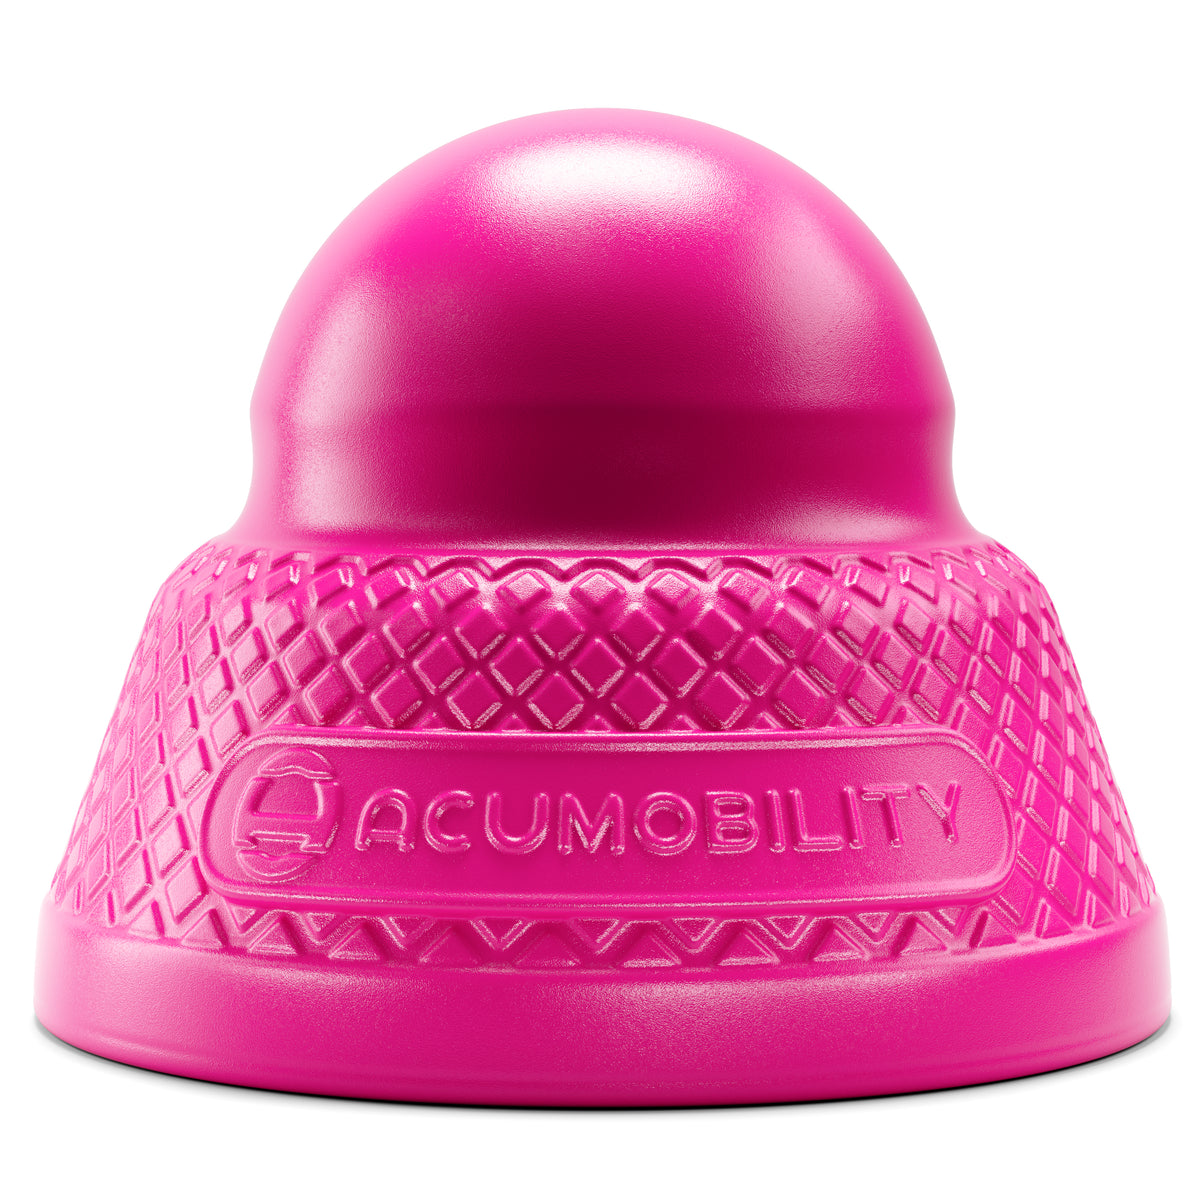 Wholesale - PINK Acumobility Ball - Increments of 8